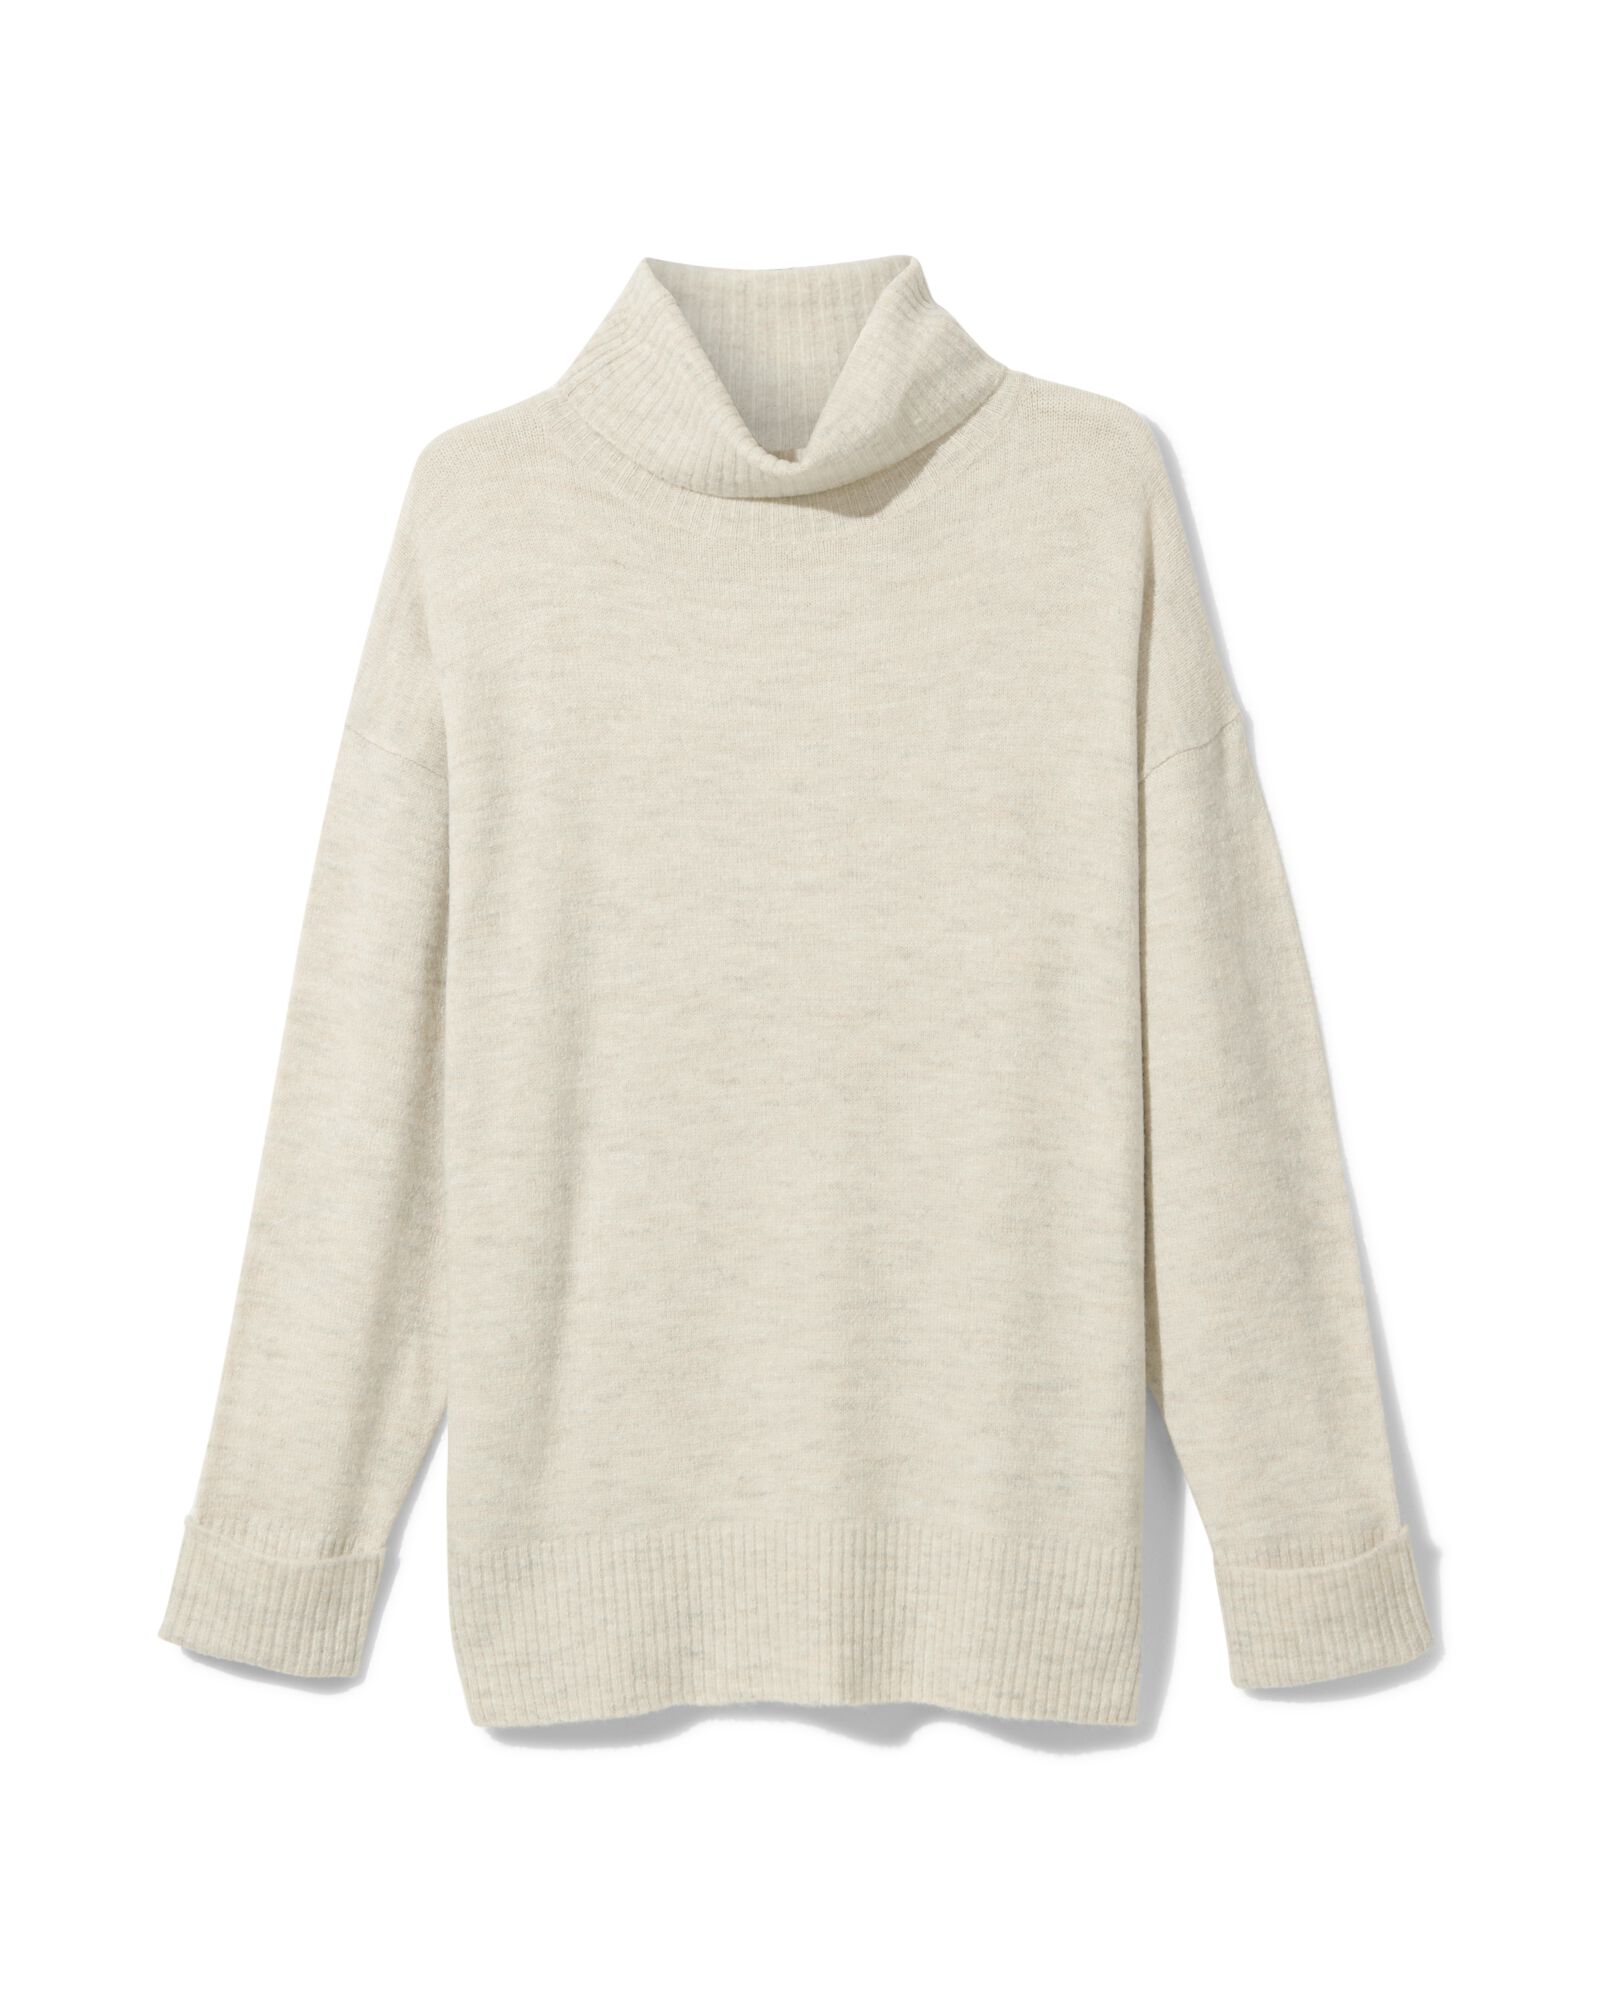 pull en maille avec col femme Vicky sable XL - 36326964 - HEMA